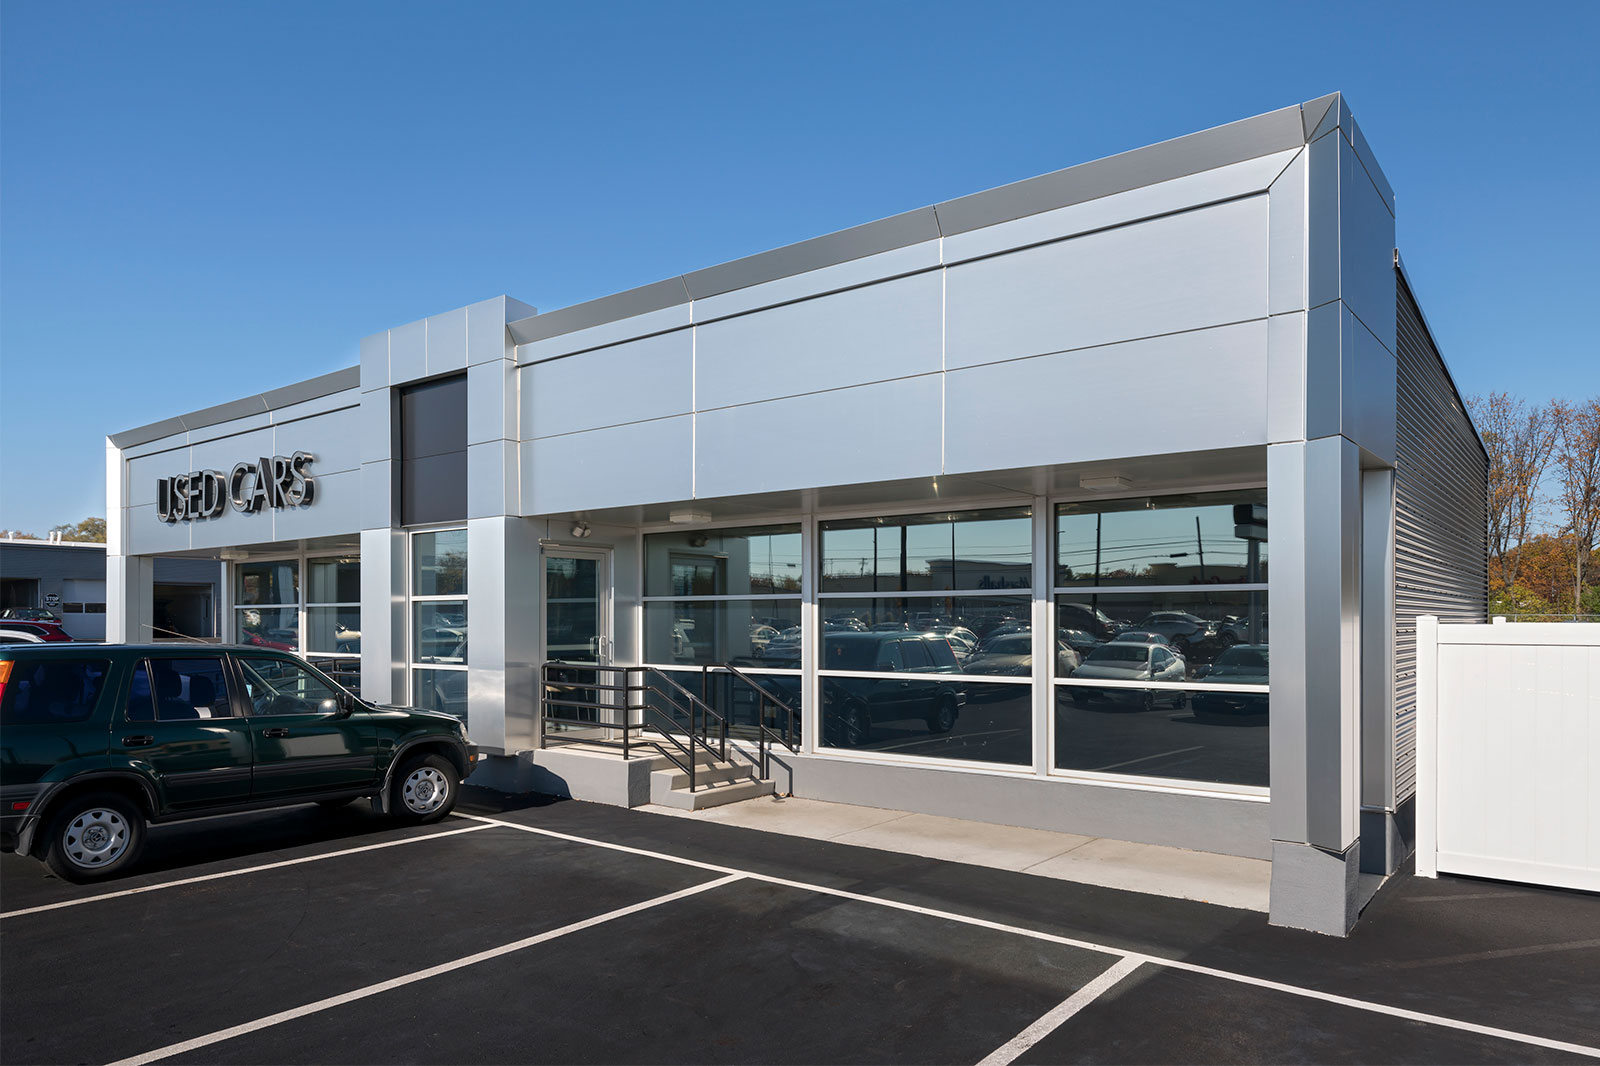 Used car center at auto dealership constructed by Miller Diversified